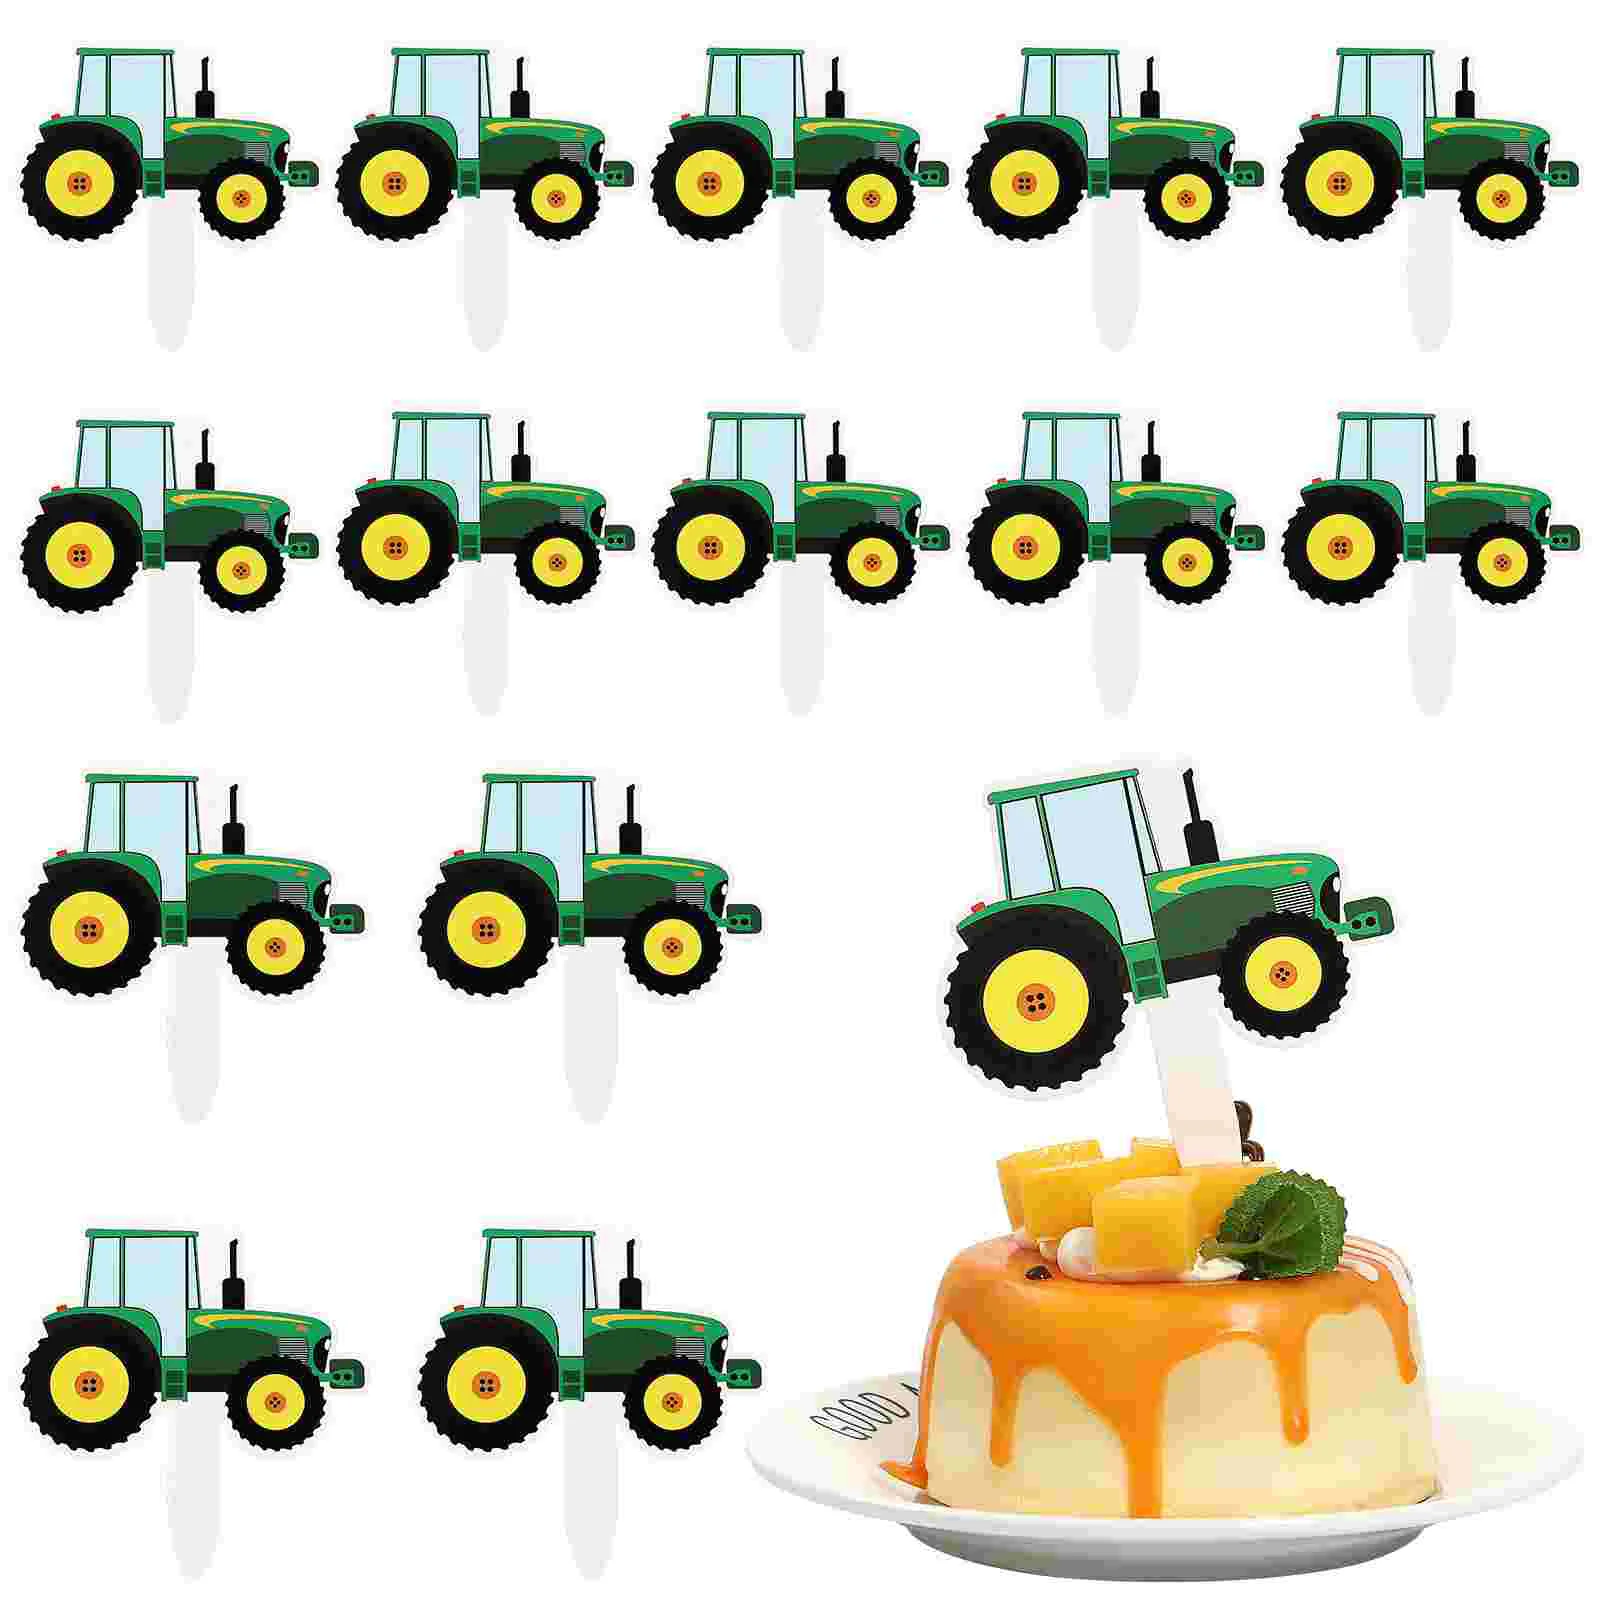 

Topper Construction Cupcake Cake Birthday Party Toppers Tractor Excavator Decorations Supplies Truck Supply Farm Theme Boys